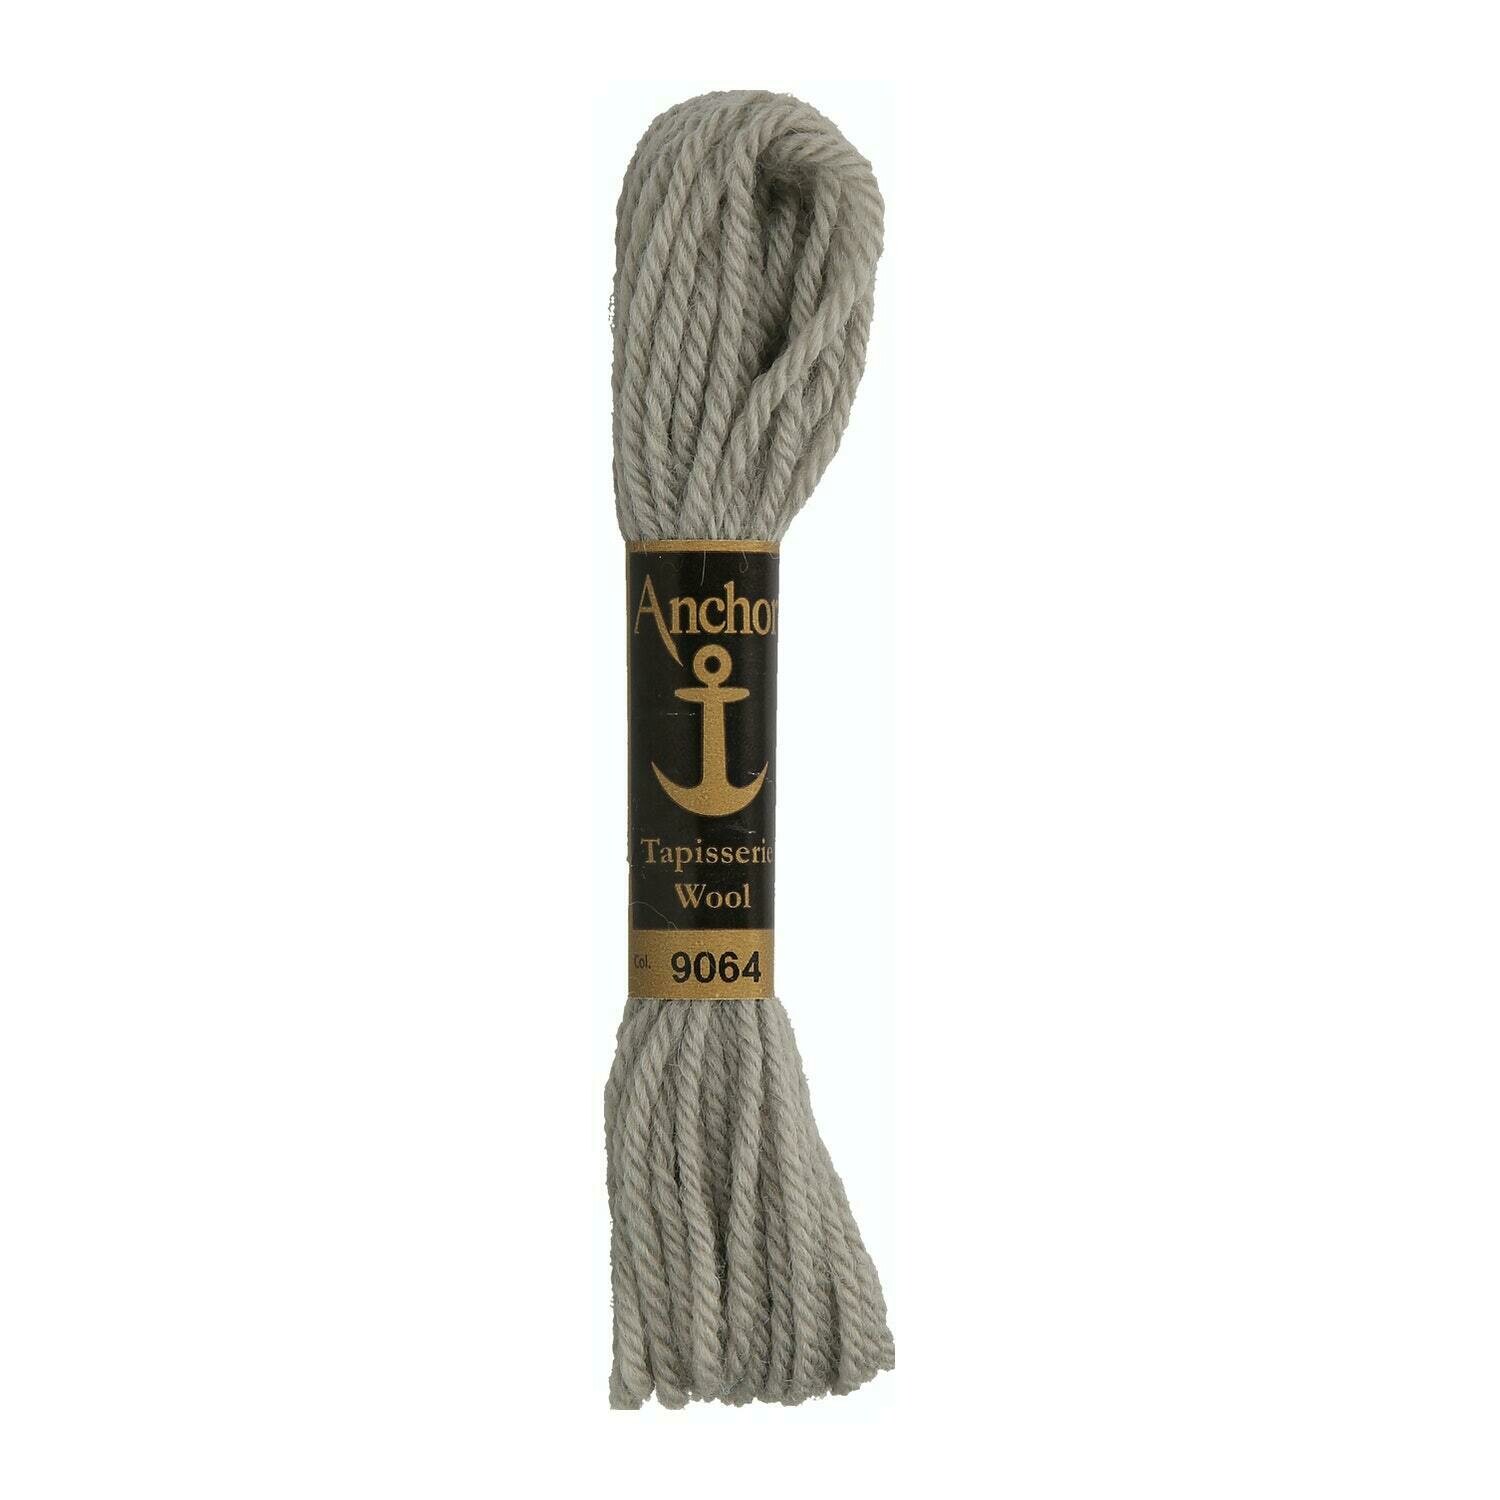 Anchor Tapisserie Wool #09064